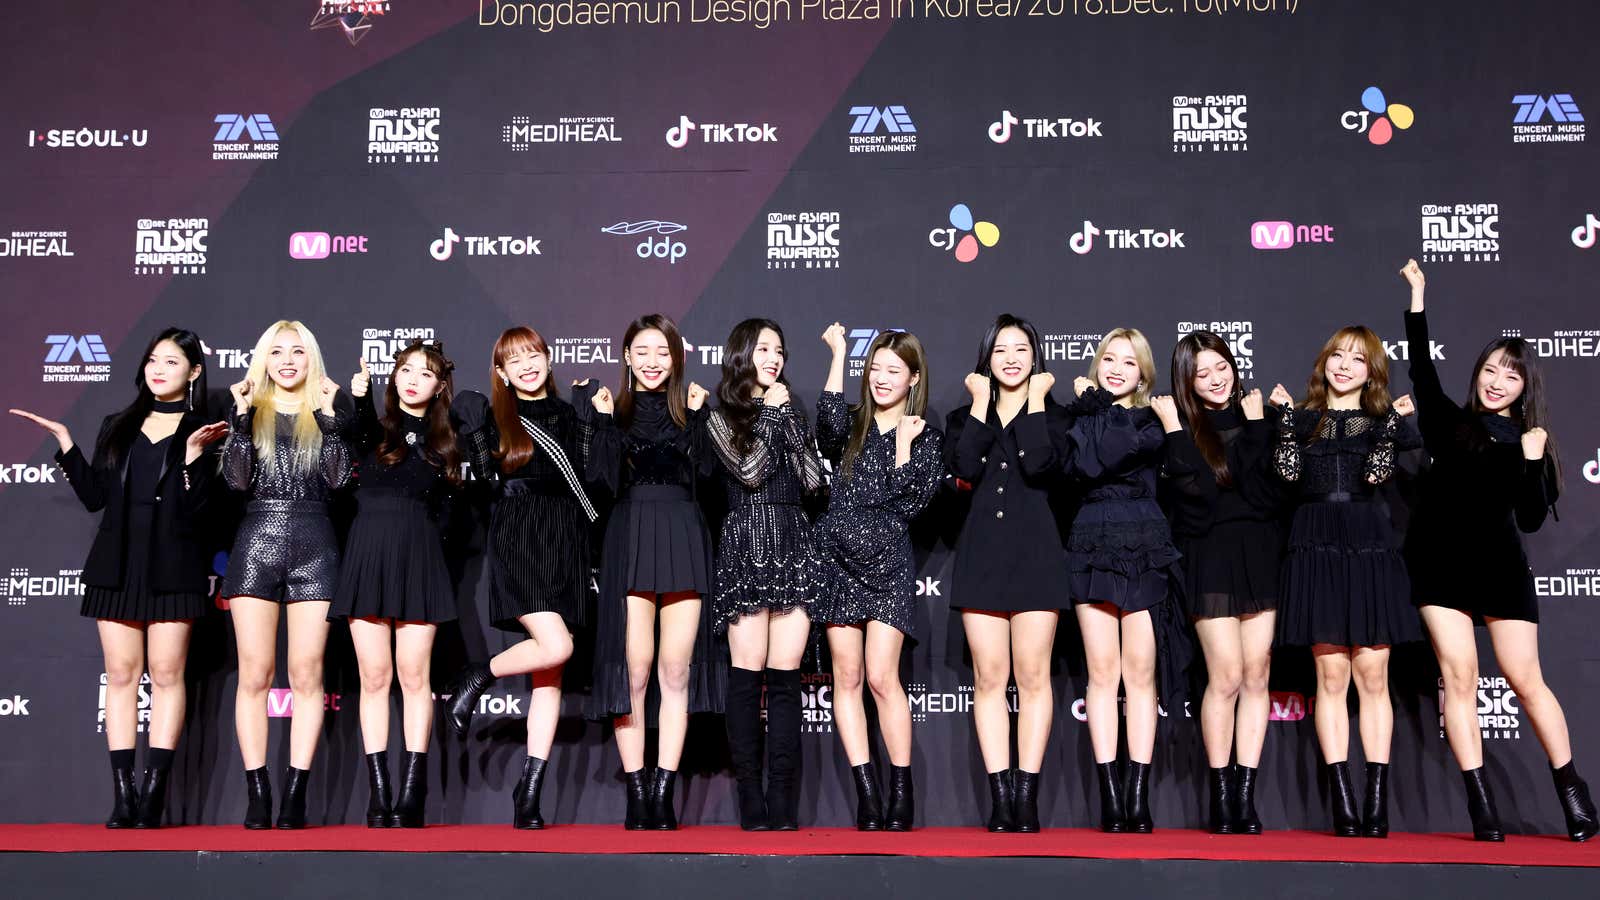 Girl group LOONA attend the 2018 Mnet Music Awards on Dec. 10, 2018 in Seoul, South Korea.